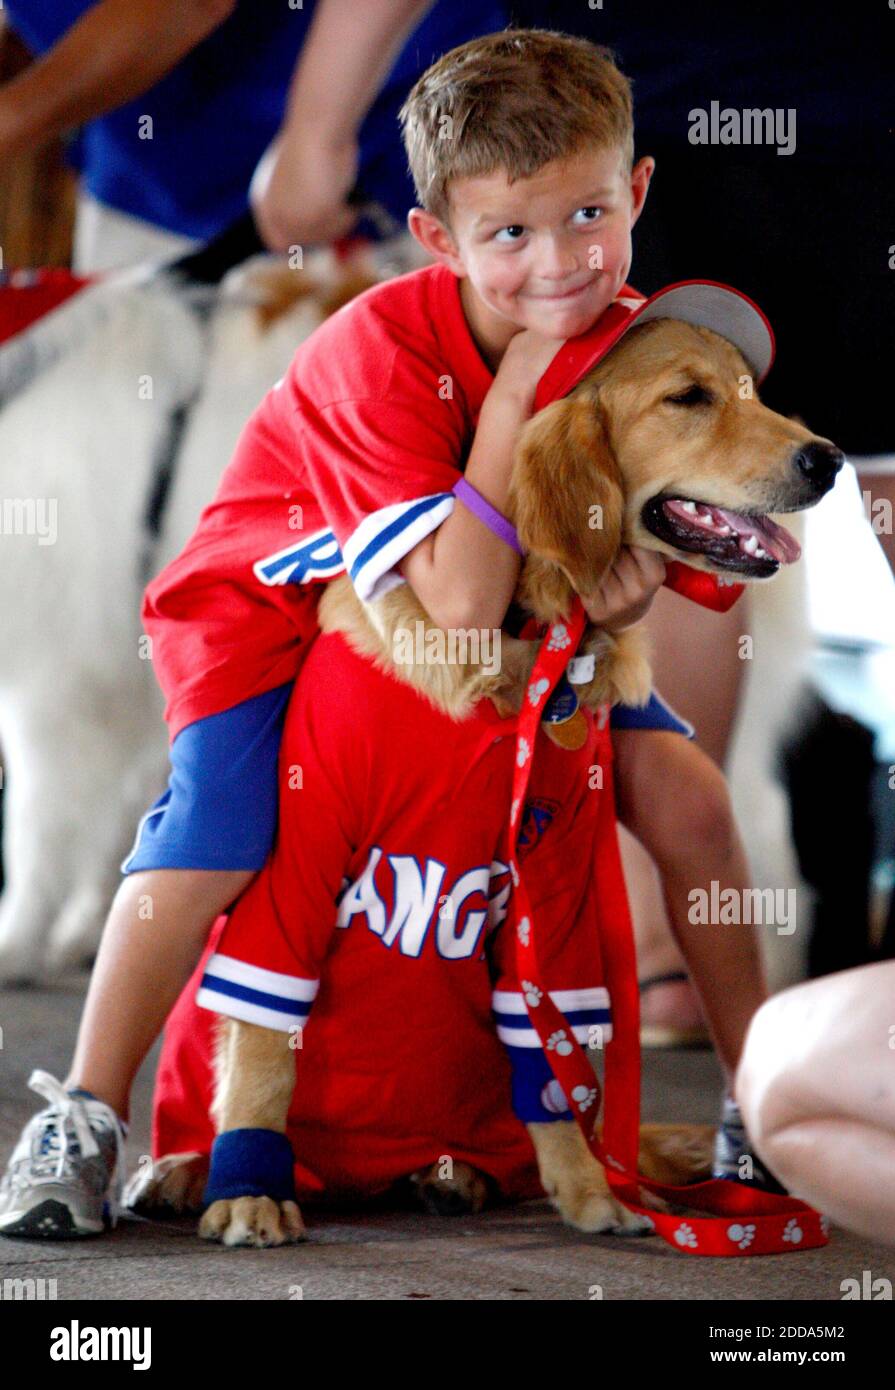 NO FILM, NO VIDEO, NO TV, NO DOCUMENTARY - Los Angeles Angels' young fan Jaret Liebbe holds his dog Telias and pose for a photo at dog night during the MLB Baseball match, Texas Rangers vs Los Angeles Angels at Rangers Ballpark in Arlington, USA on July 25, 2010. Photo by Richard W. Rodriguez/MCT/ABACAPRESS.COM Stock Photo